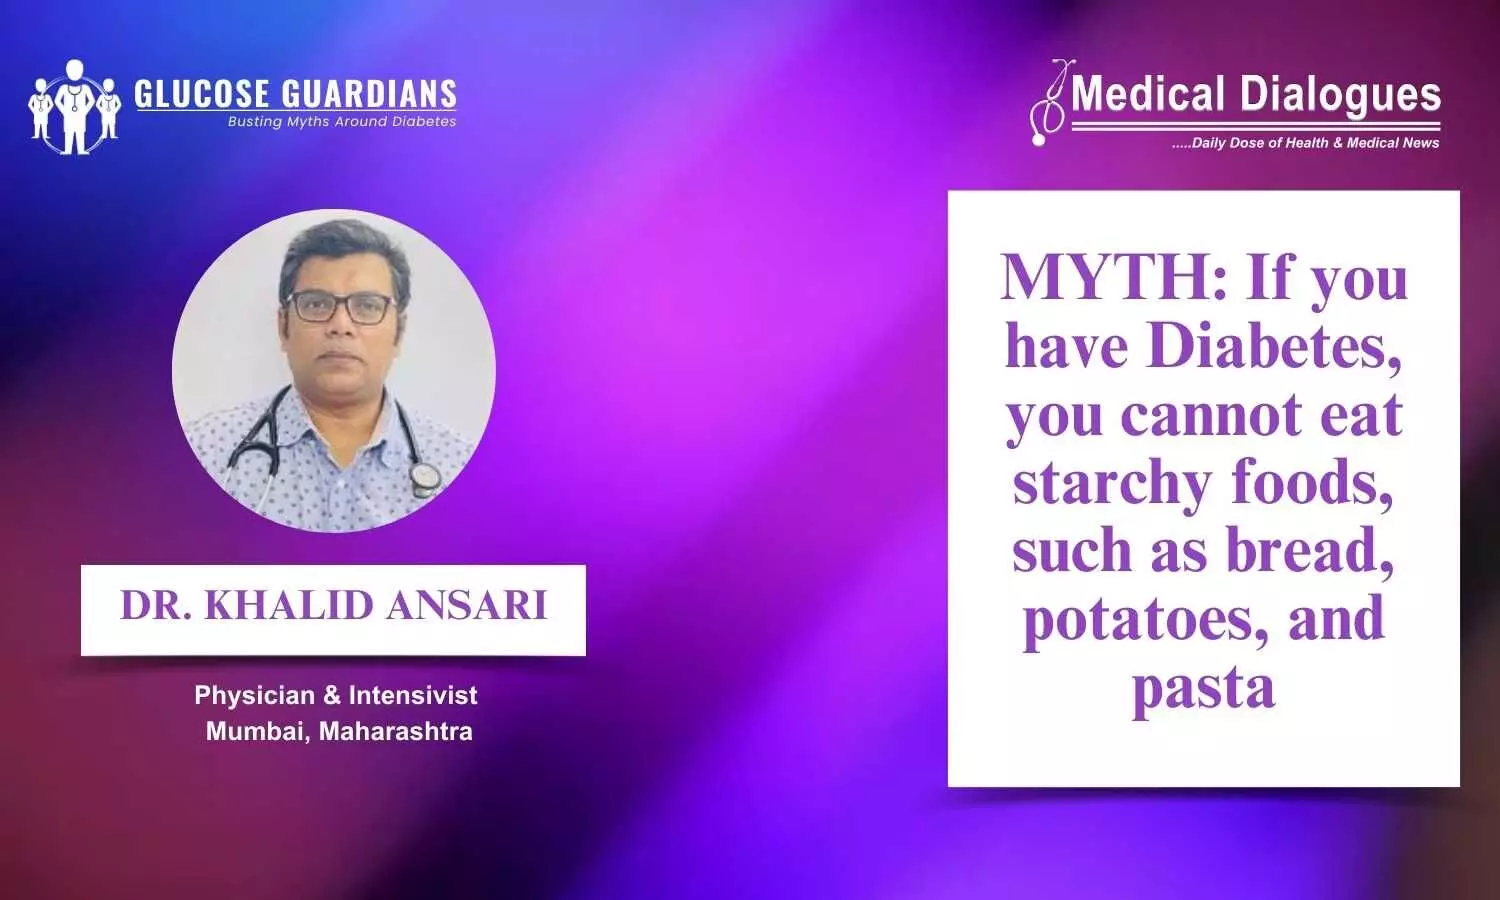 Dispelling Myths related to eating starchy foods in the Diabetes - Dr Khalid Ansari